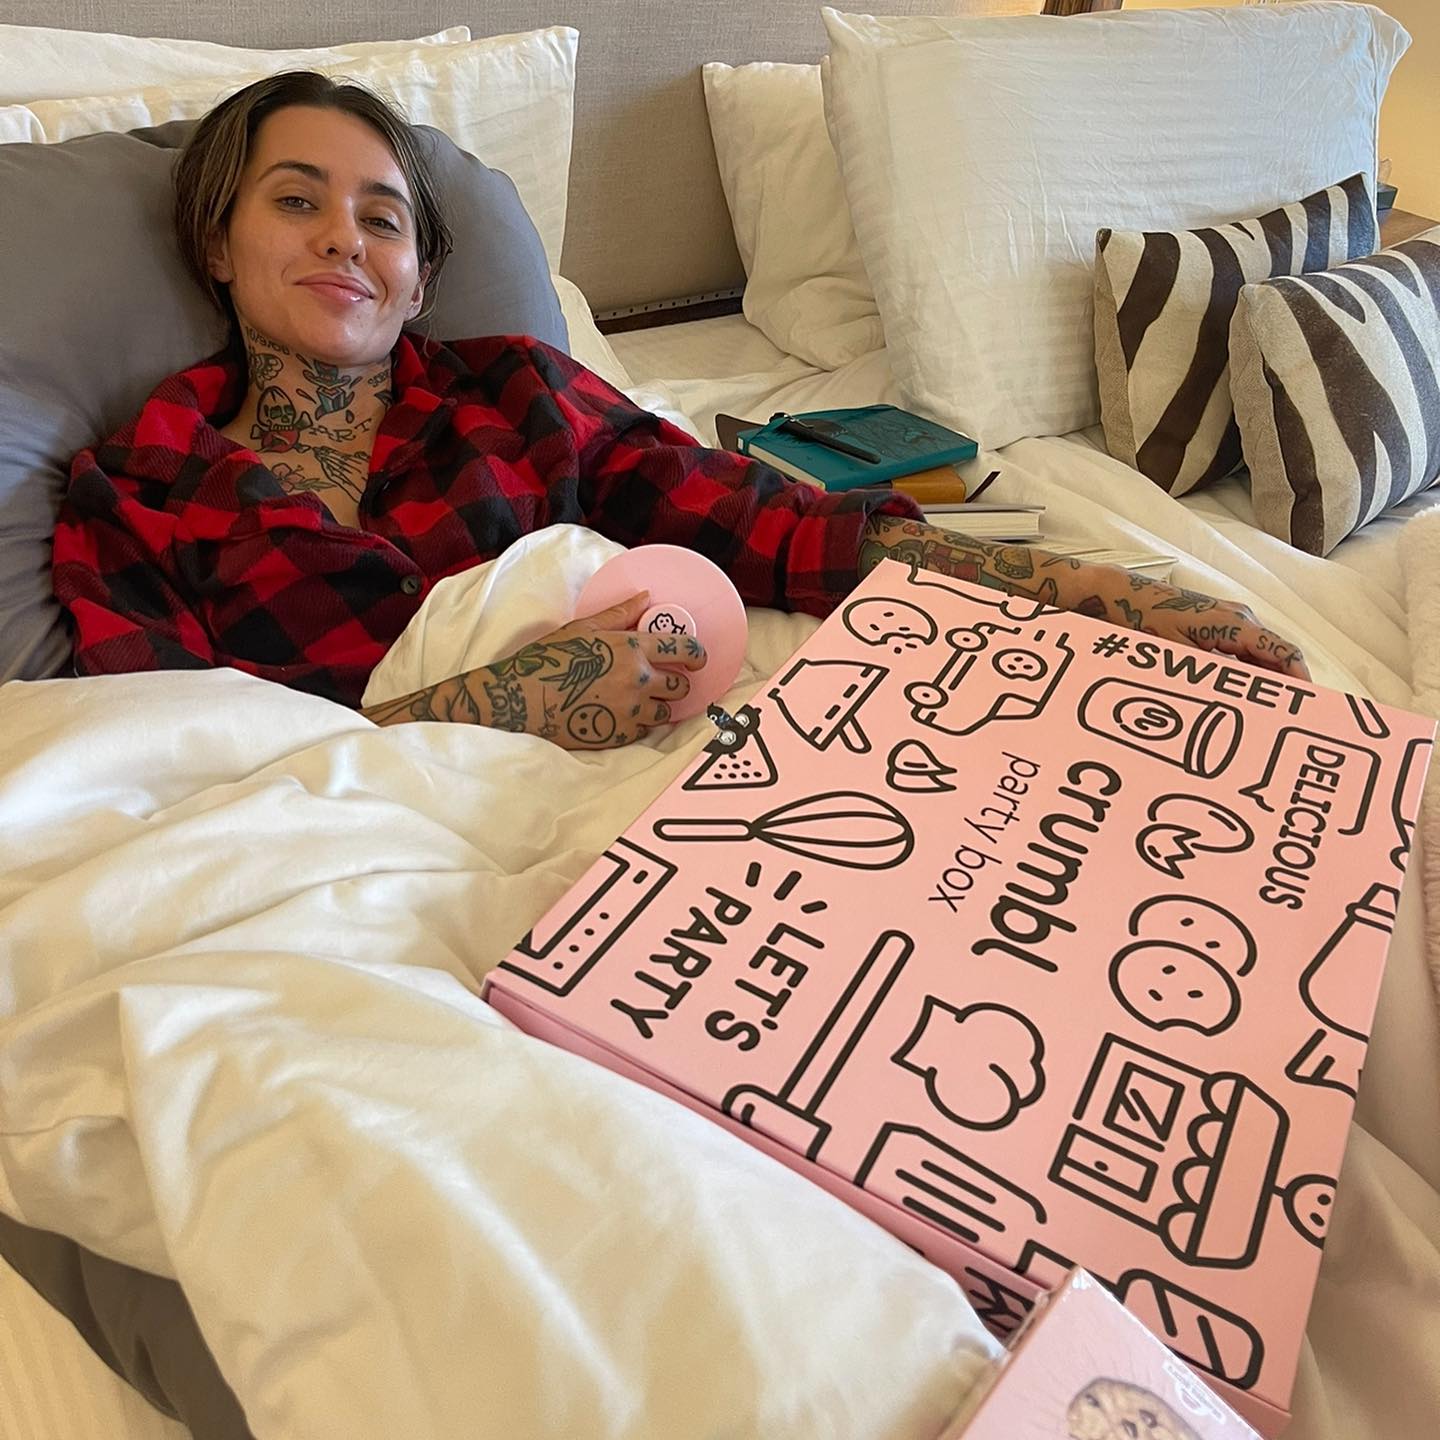 Another photo showed the singer smiling while resting in bed